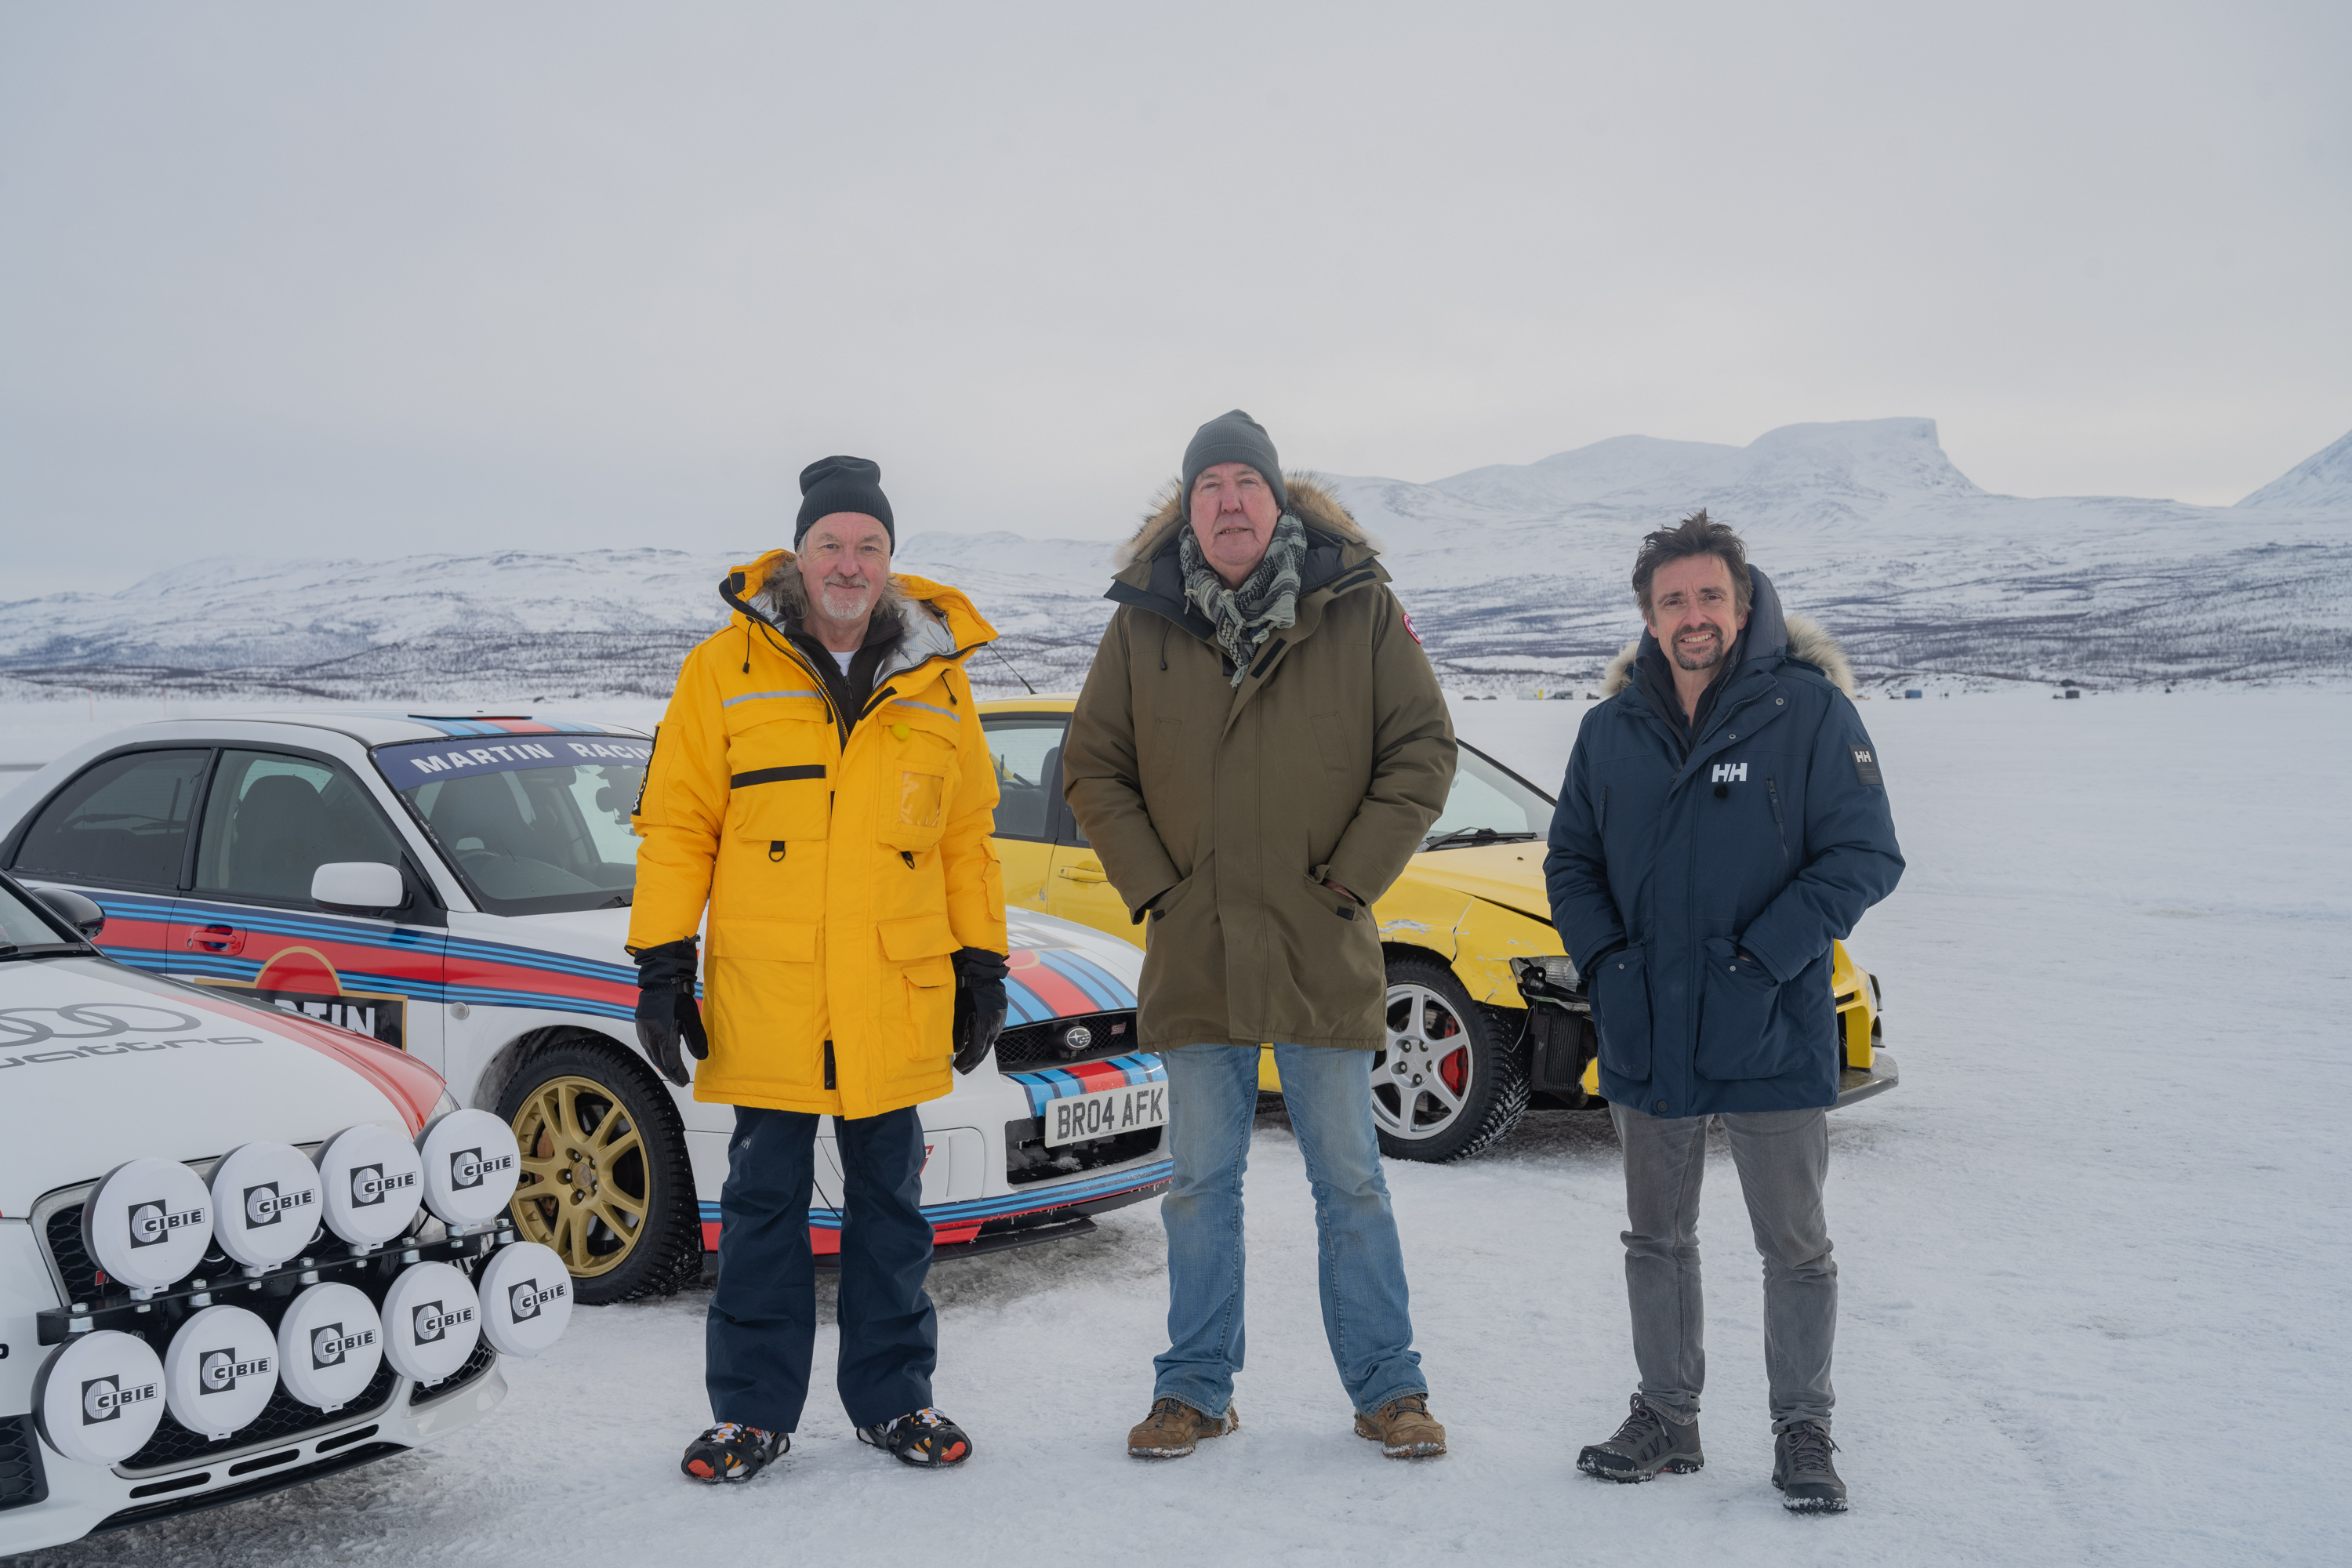 Handout Photo from The Grand Tour: A Scandi Flick. Pictured: (L-R) James May, Jeremy Clarkson, Richard Hammond